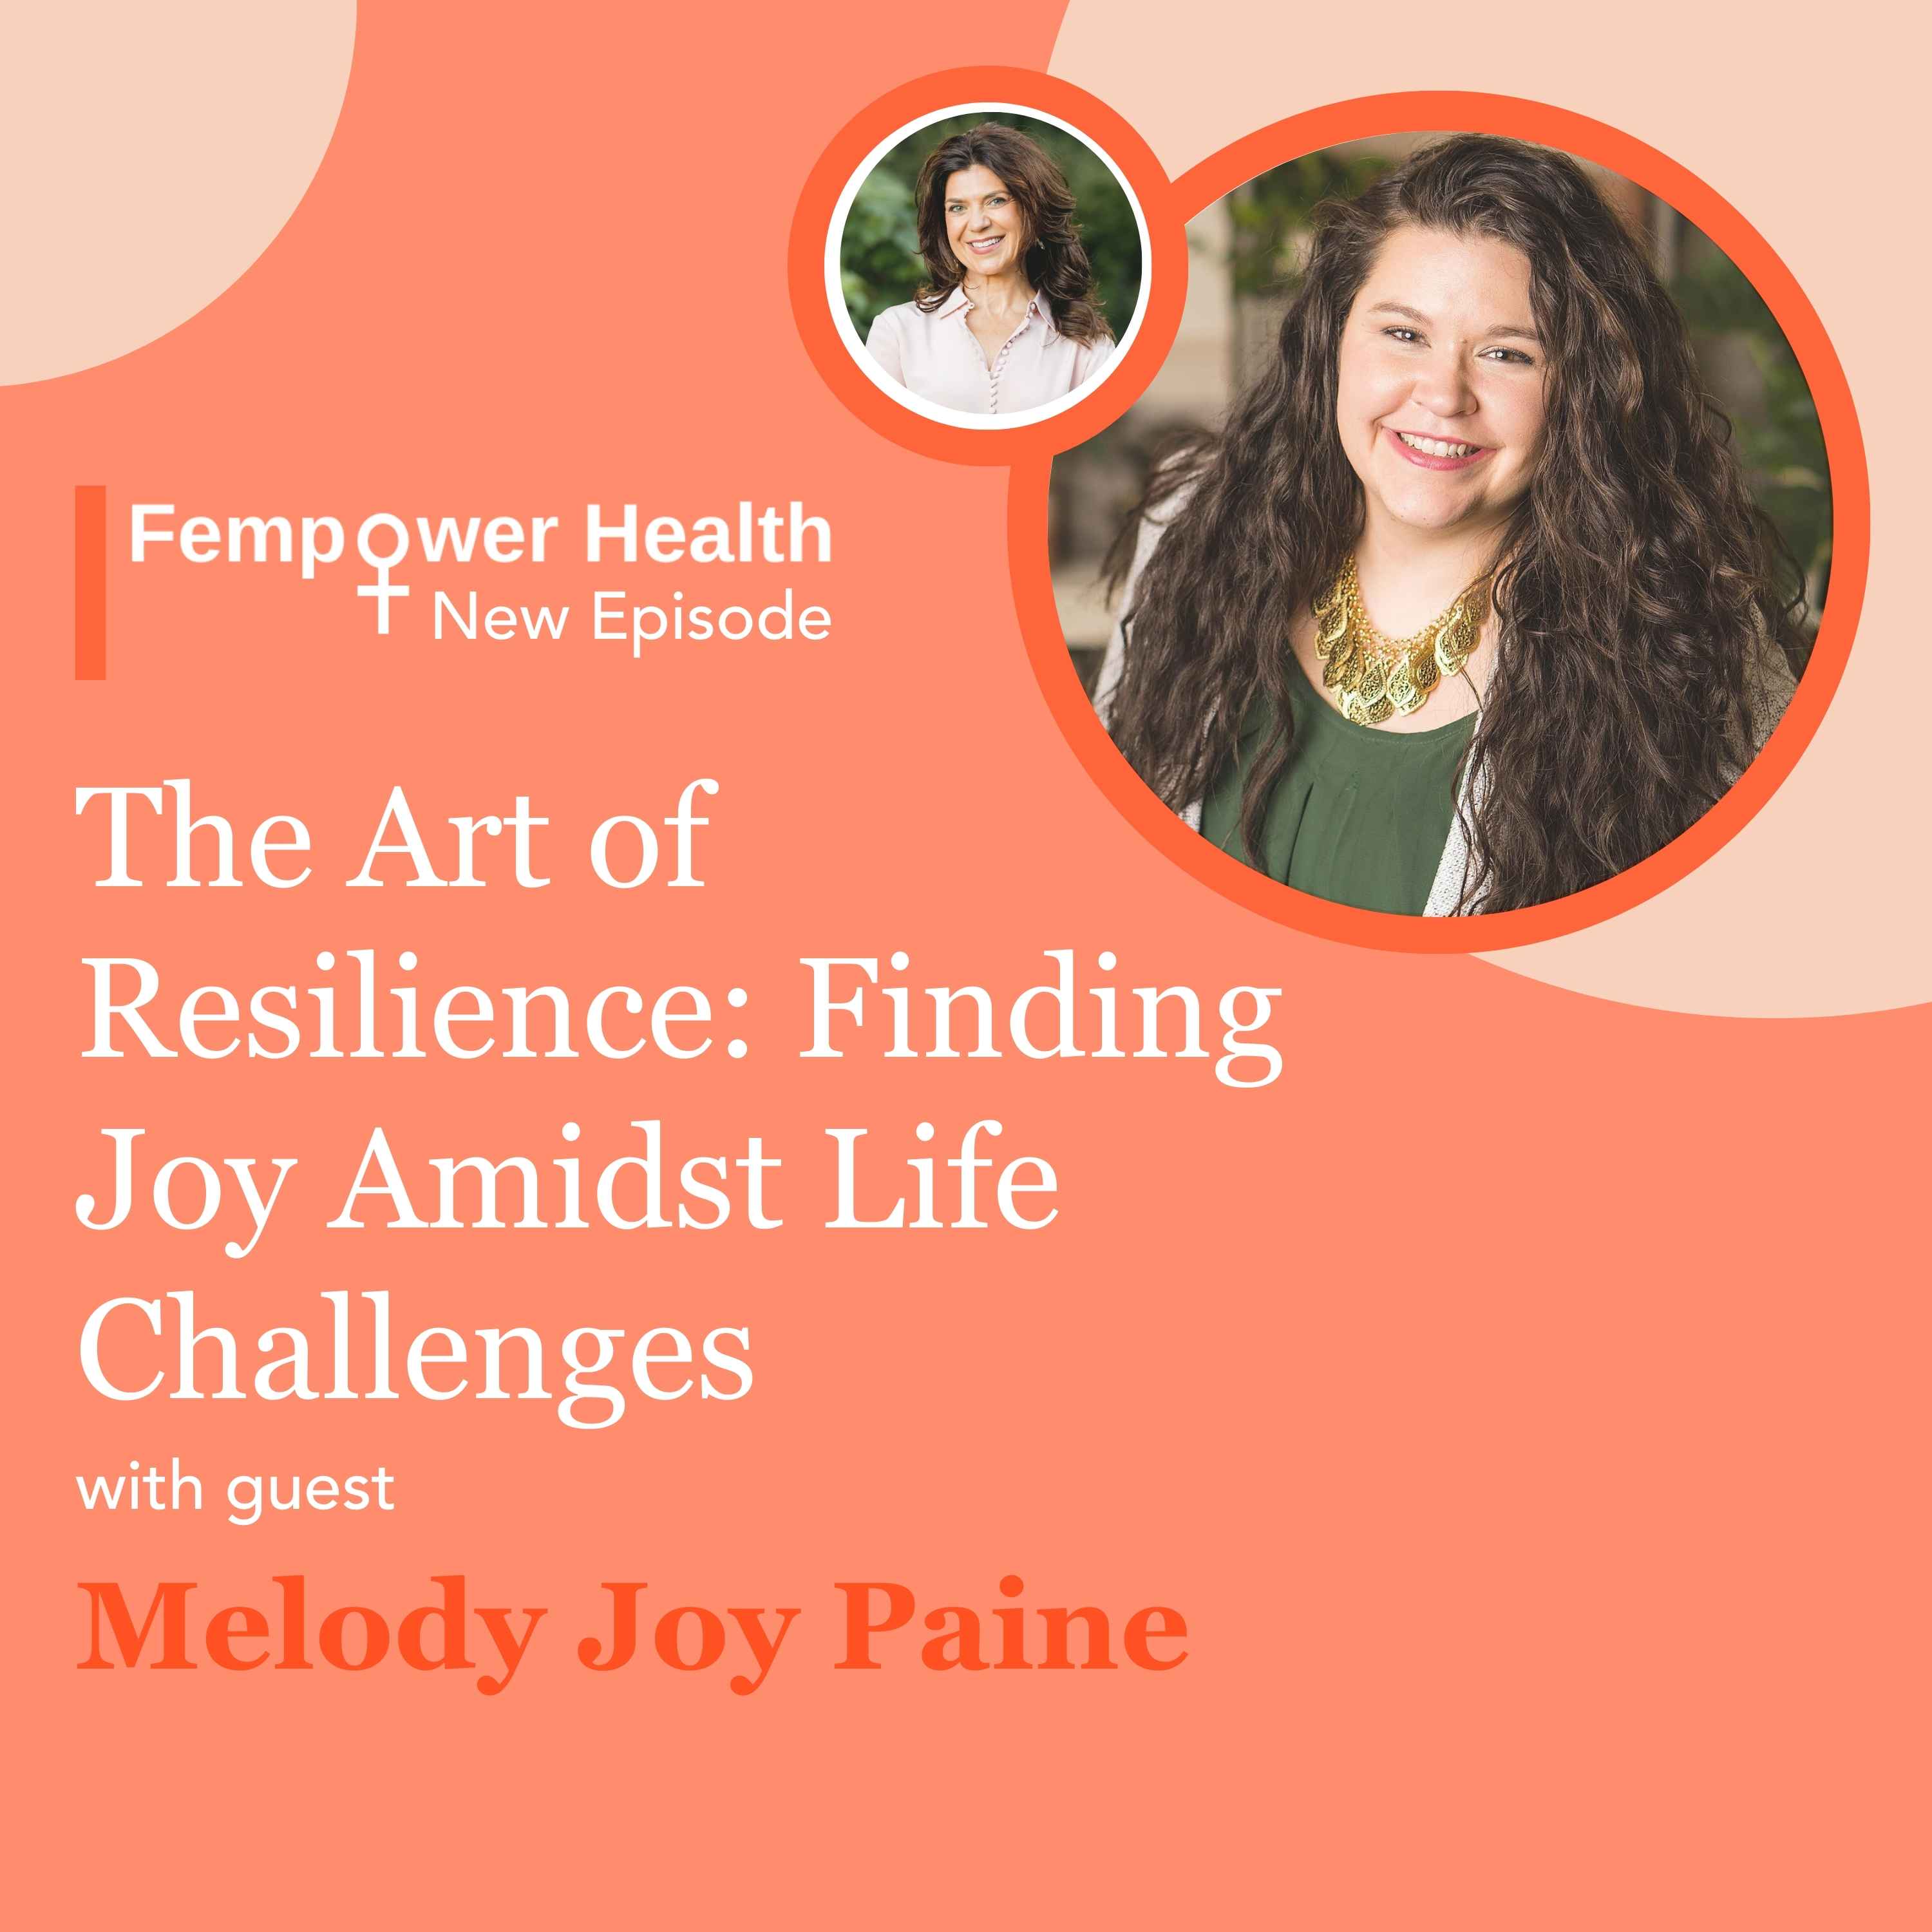 The Art of Resilience: Finding Joy Amidst Life’s Challenges | Melody Joy Paine